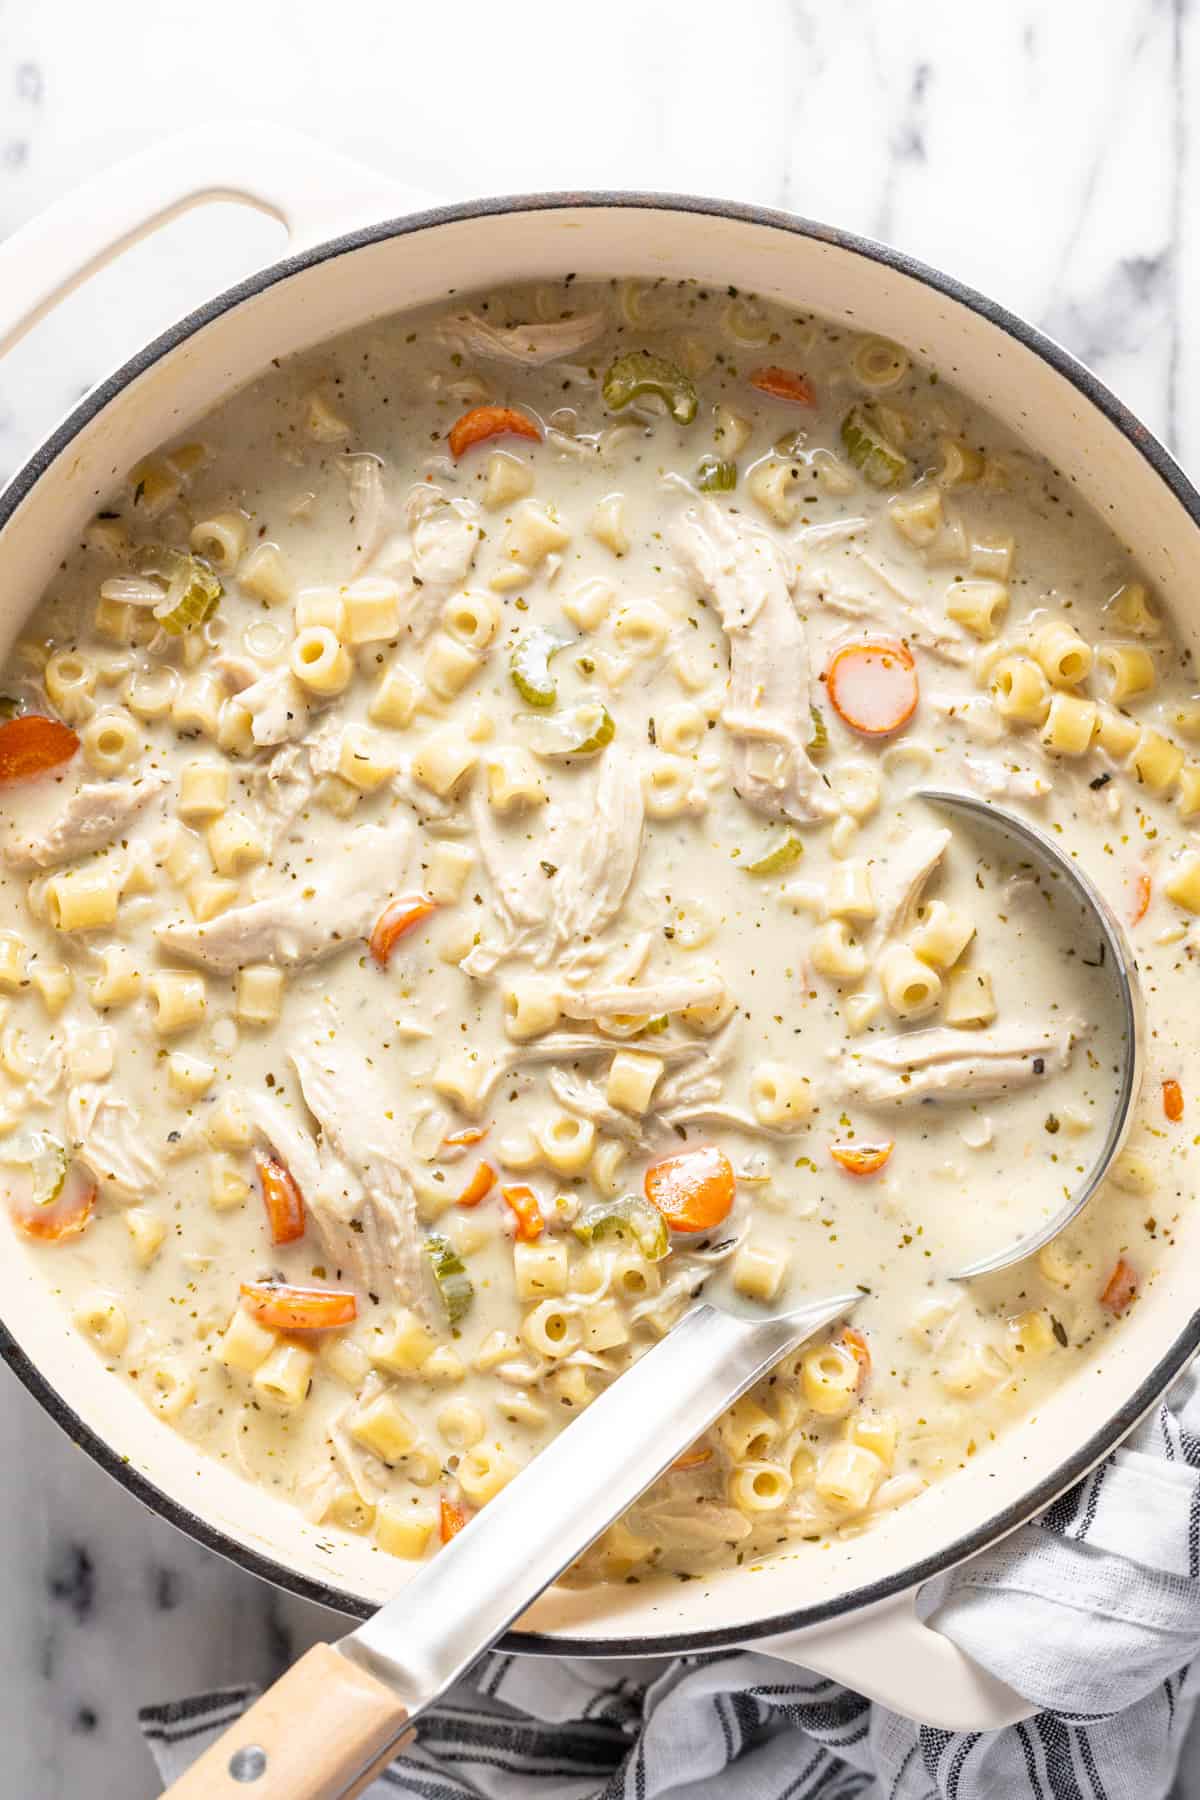 Large pot filled with creamy homemade chicken noodle soup.